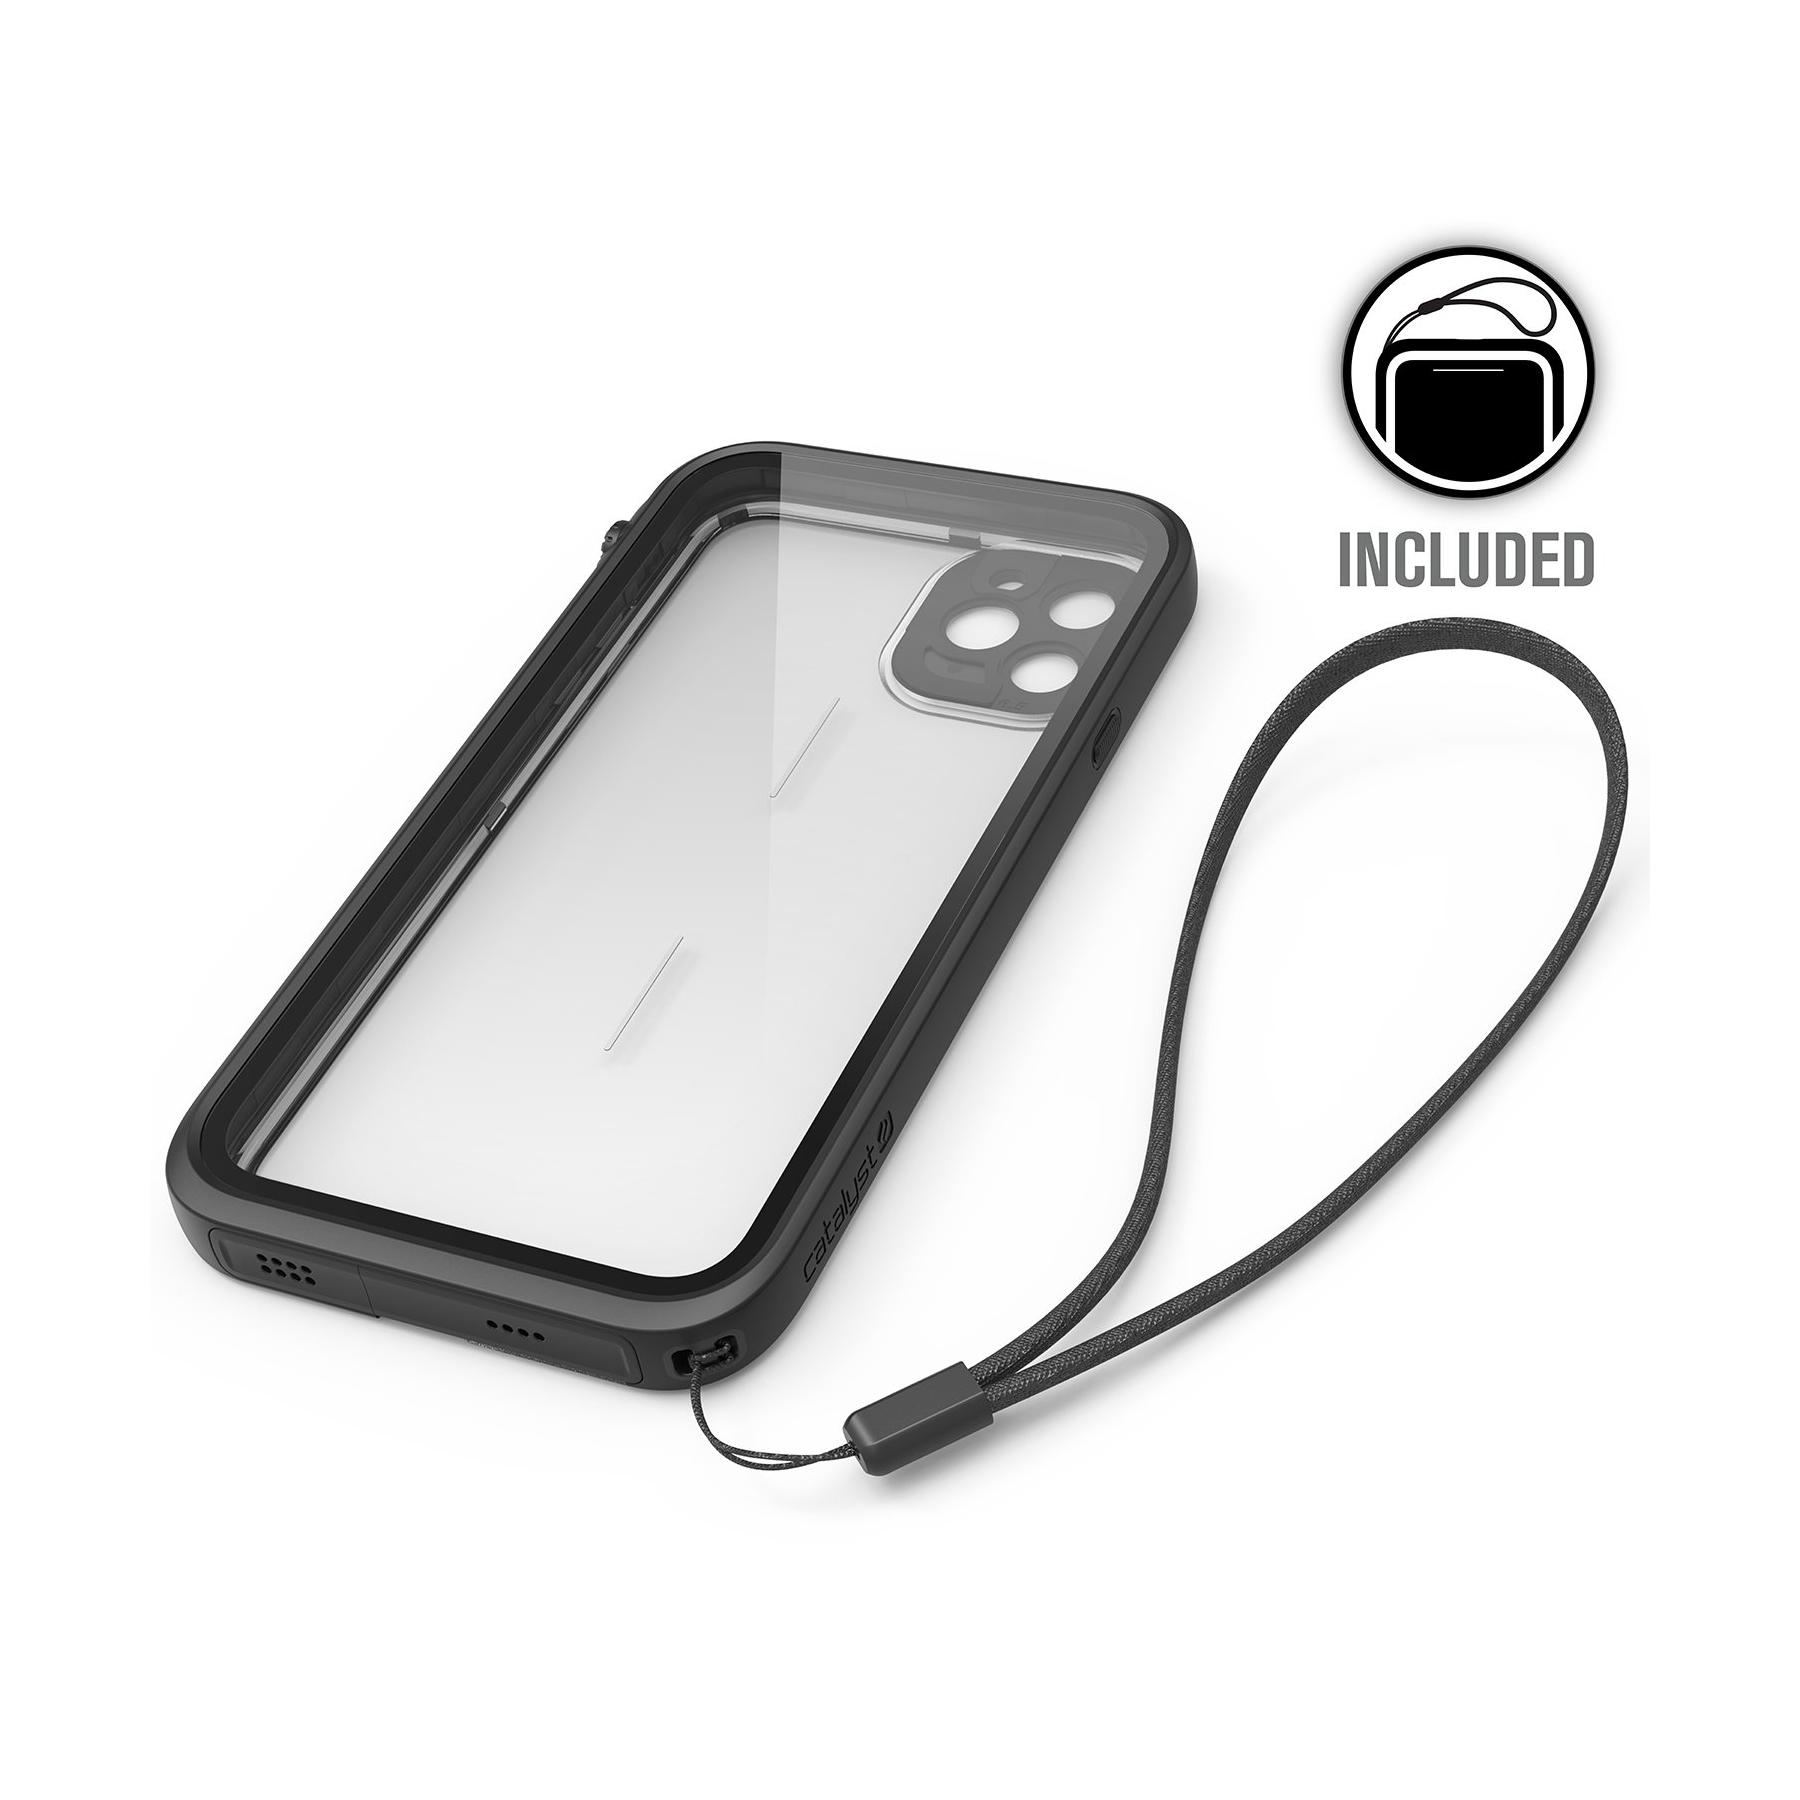 Catalyst Waterproof iPhone 11 Pro Max Case – Stealth Black